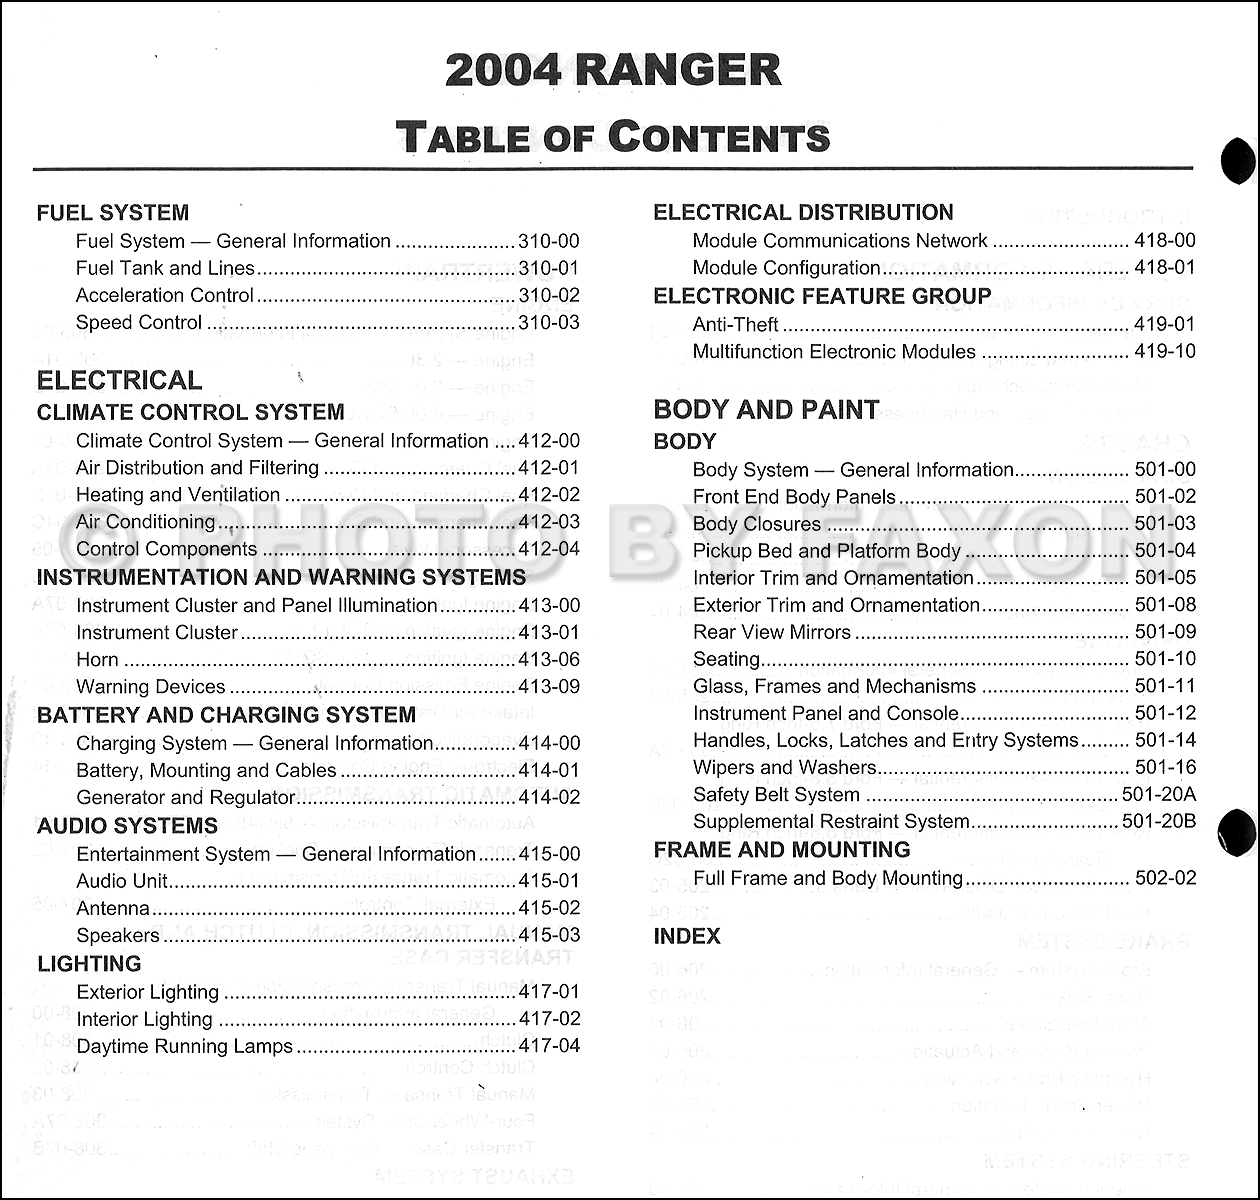 2004 Ford ranger owners manual #4